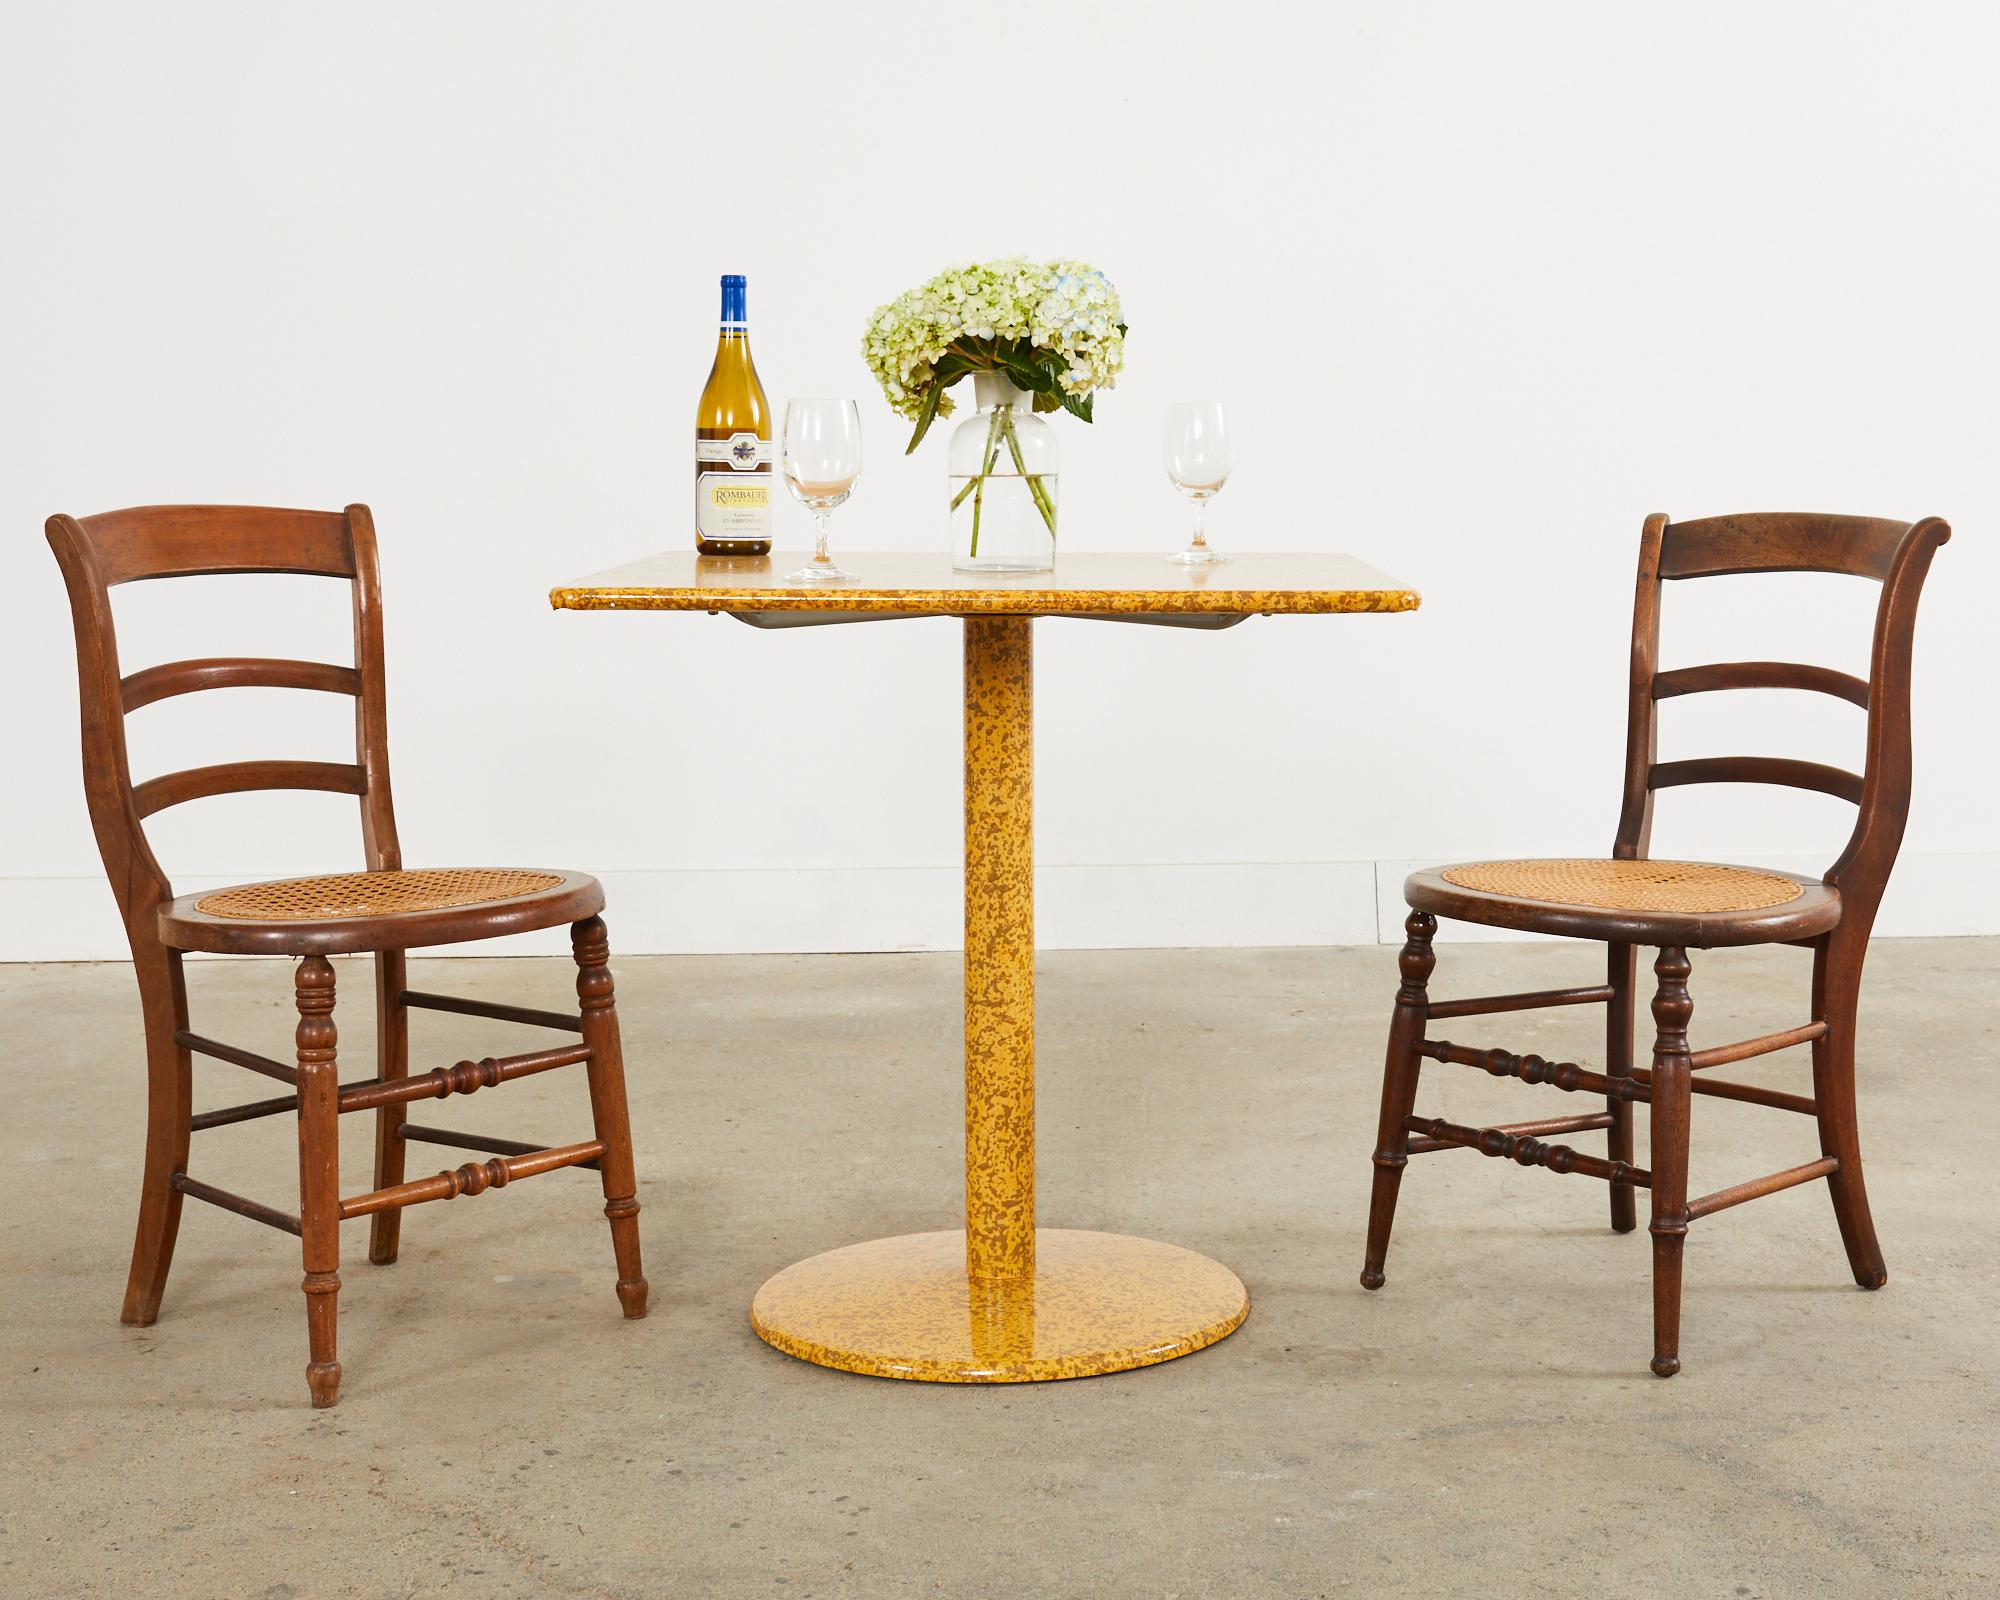 Contemporary modern steel bistro or cafe style dining table lacquer spreckled by artist Ira Yeager (American 1938-2022). The pedestal table has a steel frame and a square top with round edges. The table has brown specks over a dramatic mustard